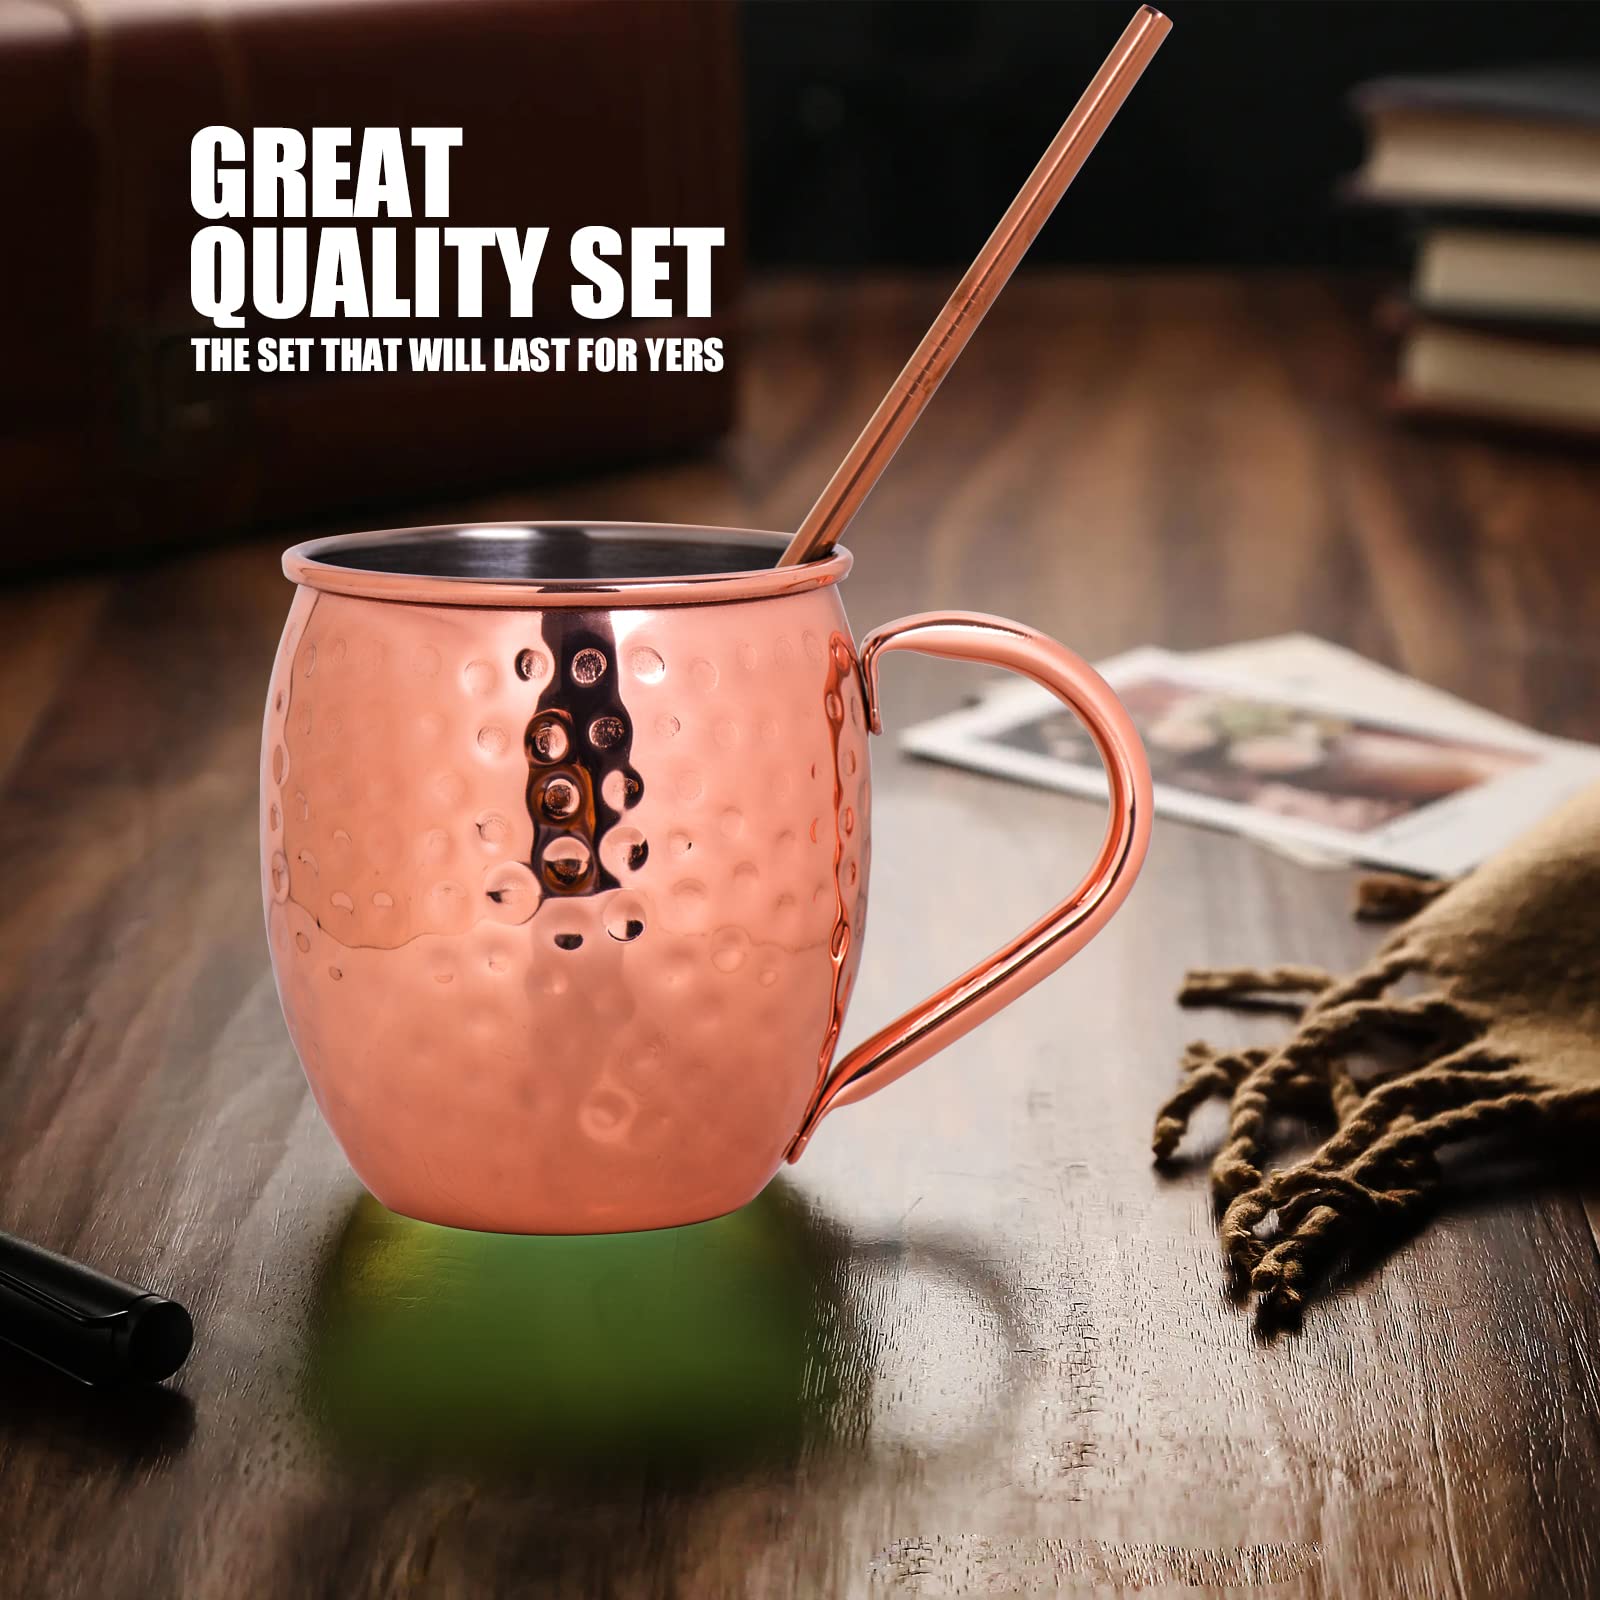 Crownyard Moscow Mule Copper Mugs Set of 4 (16oz) | Solid 100% Copper Cups Set w/ 4 Straws,1 Shot Glass, 1 Spoon, Tarnish-Resistant,Wedding Gift & Anniversity Gift for couples